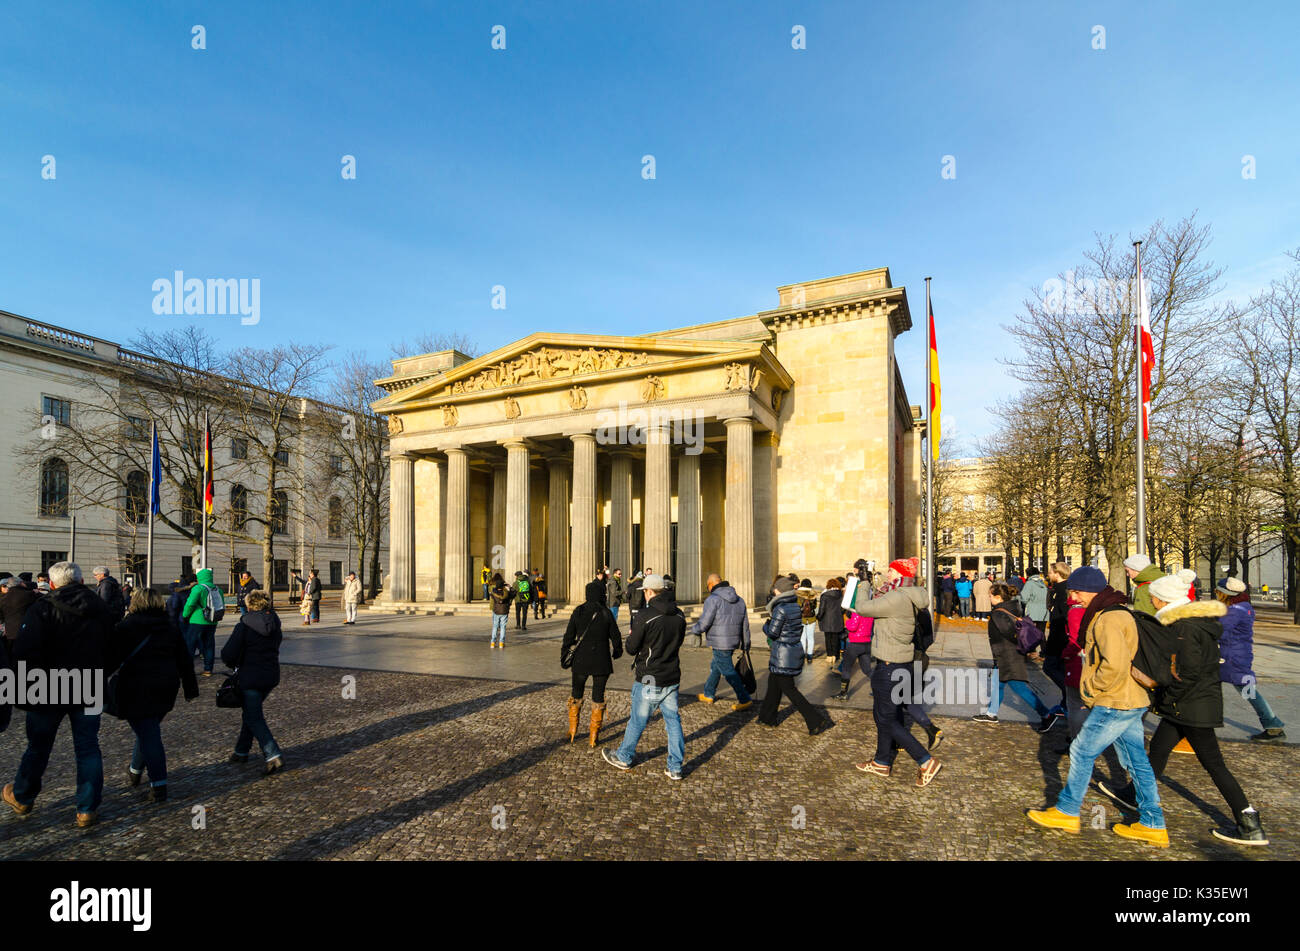 Visitors and tourists outside Neue Wache, remembrance building restored after World War II, Berlin, Germany Stock Photo